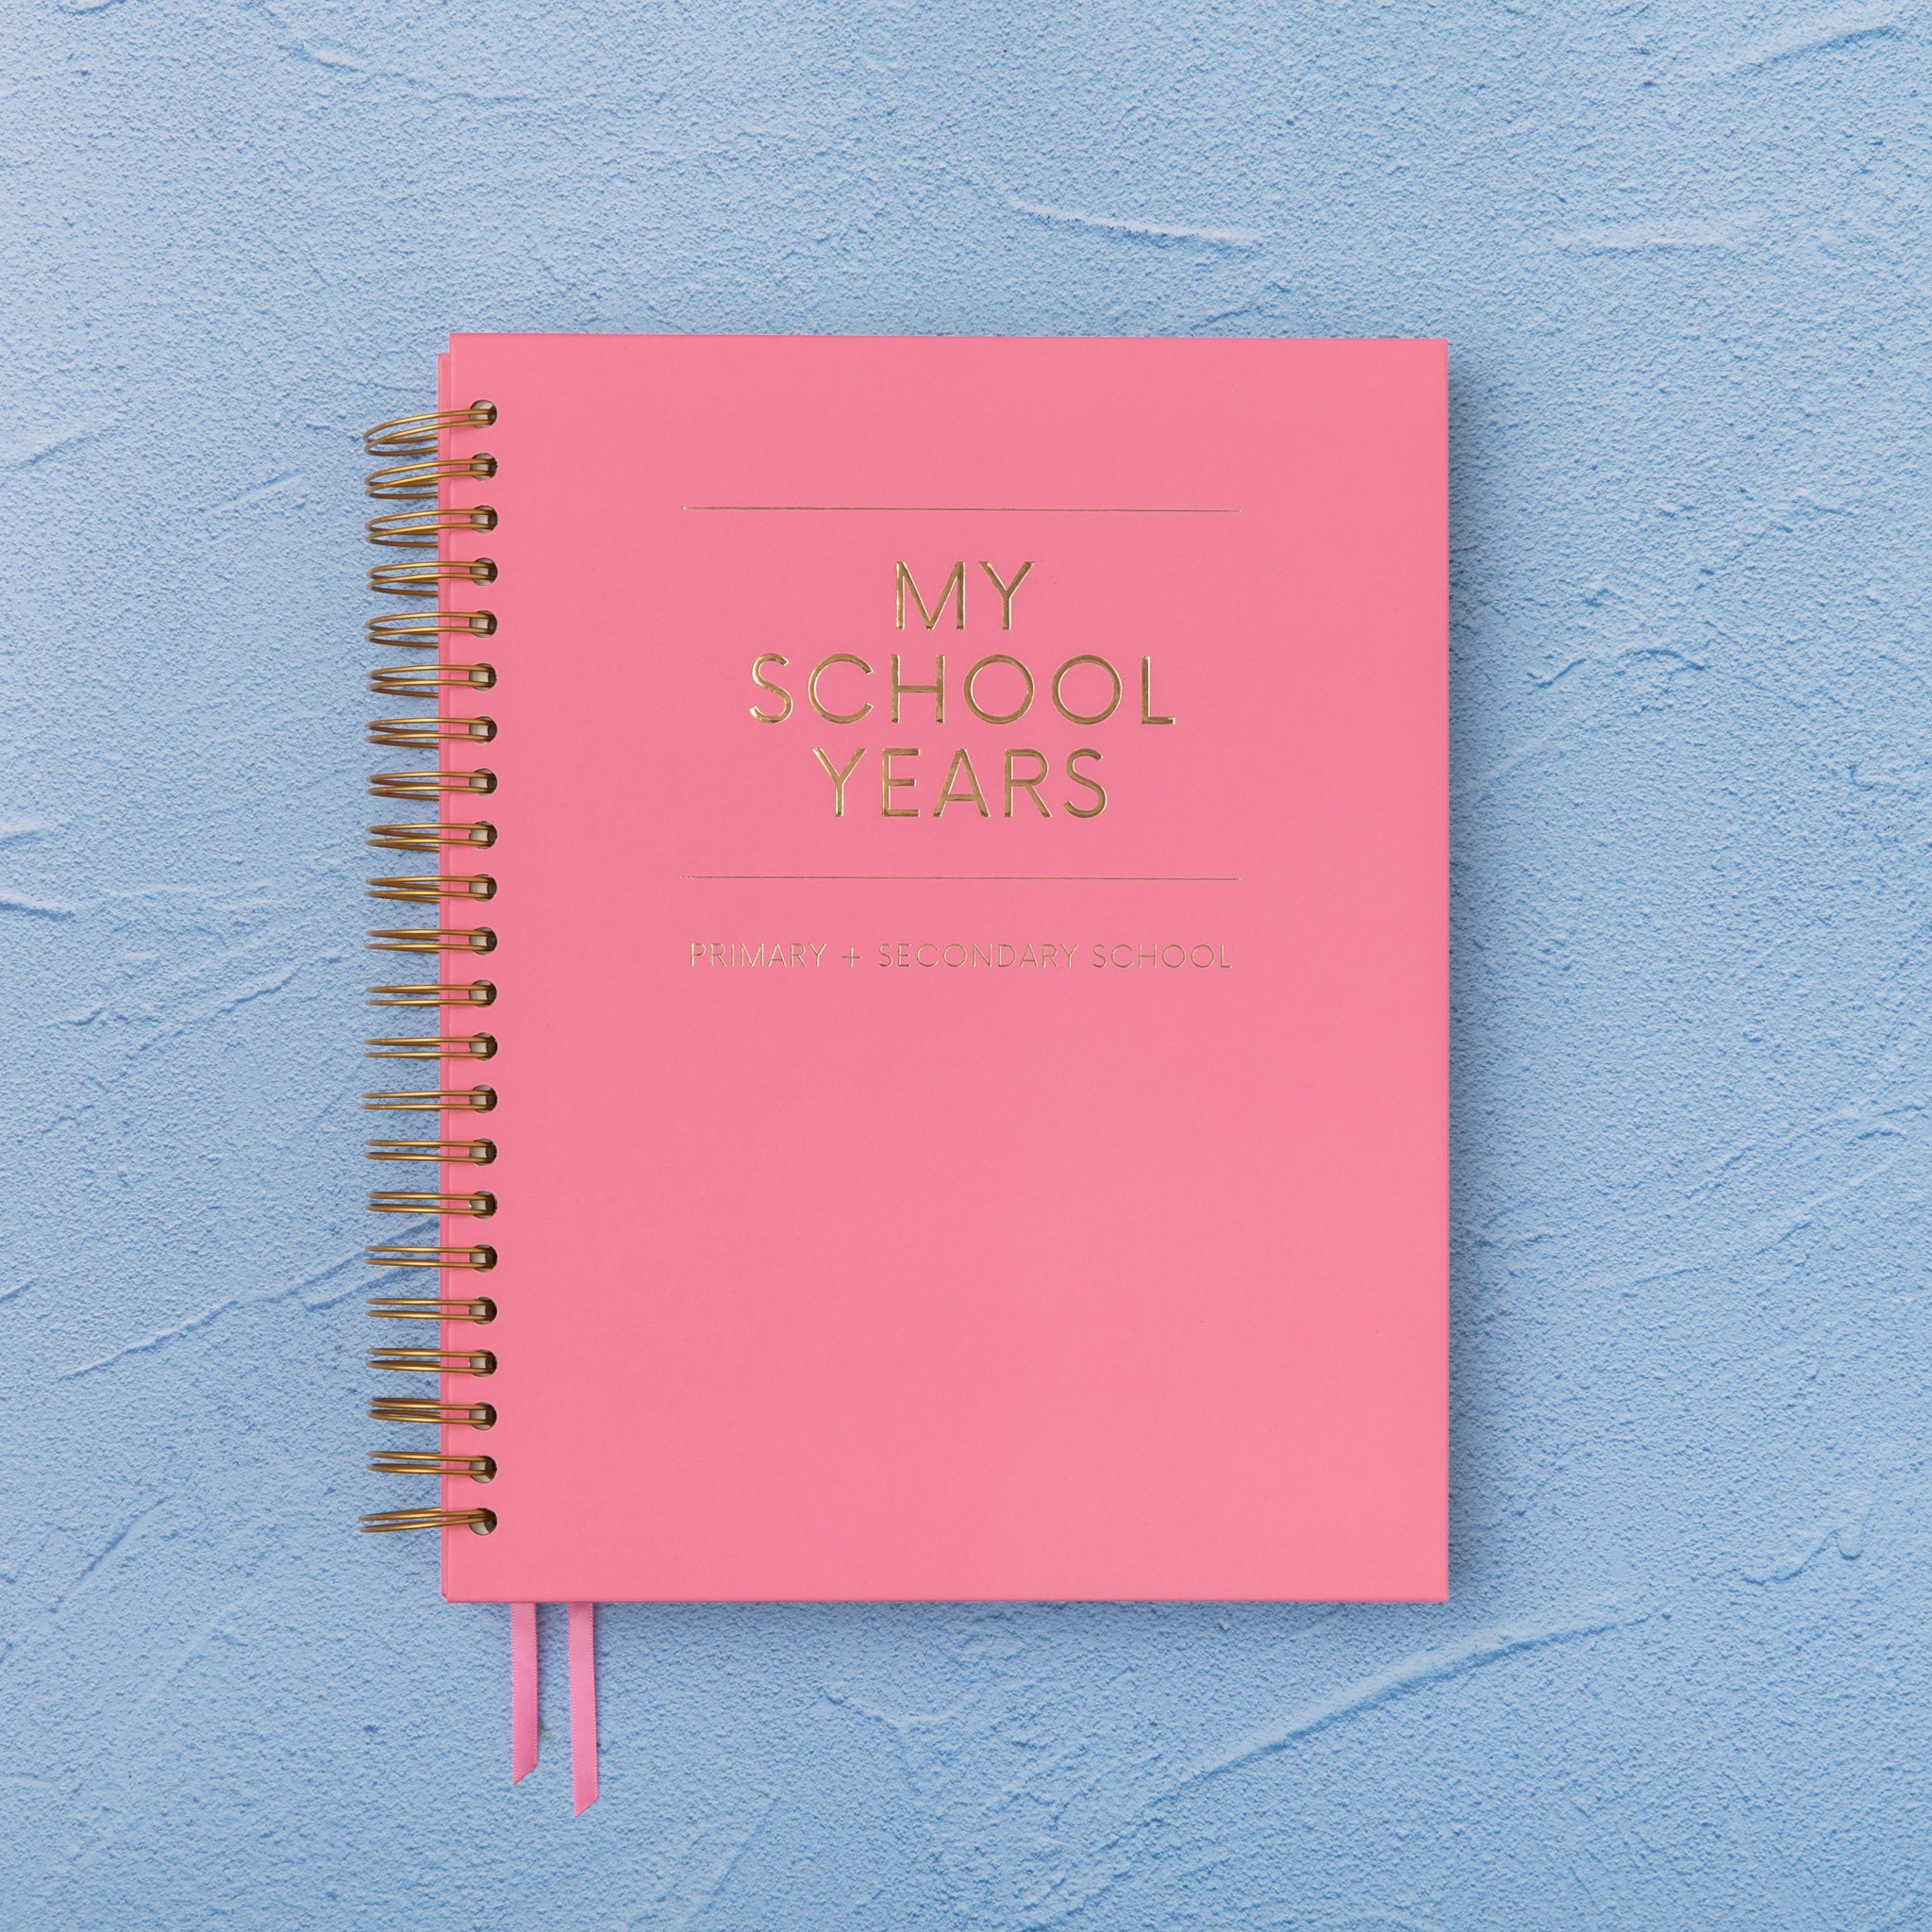 Luxe School Years Journal & Leather Cover Bundle